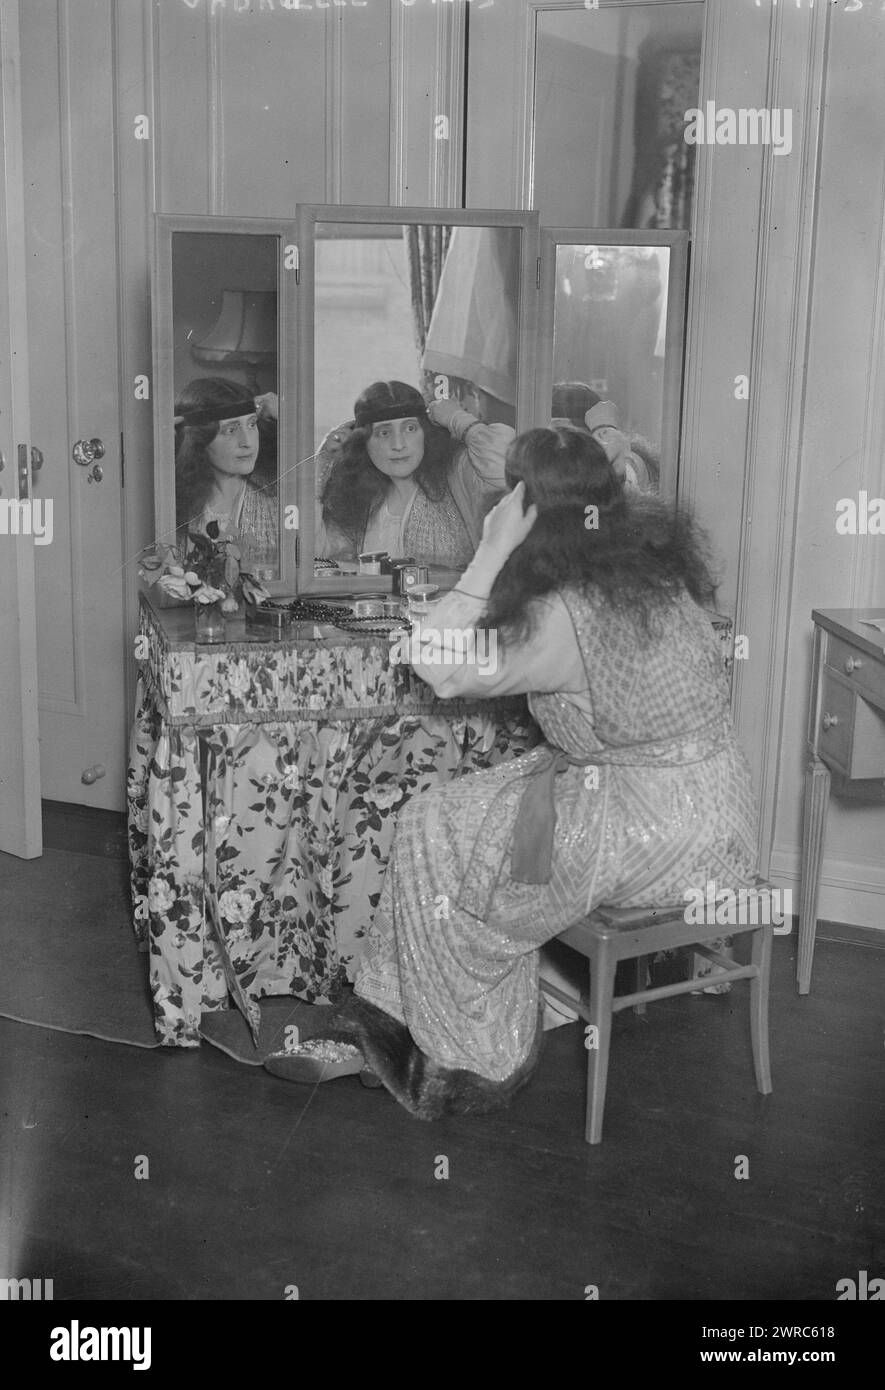 Gabrielle Gills, Photograph shows French soprano singer Gabrielle Gills whose first appearance in New York City was on January 28, 1917., 1917 Feb. 28, Glass negatives, 1 negative: glass Stock Photo